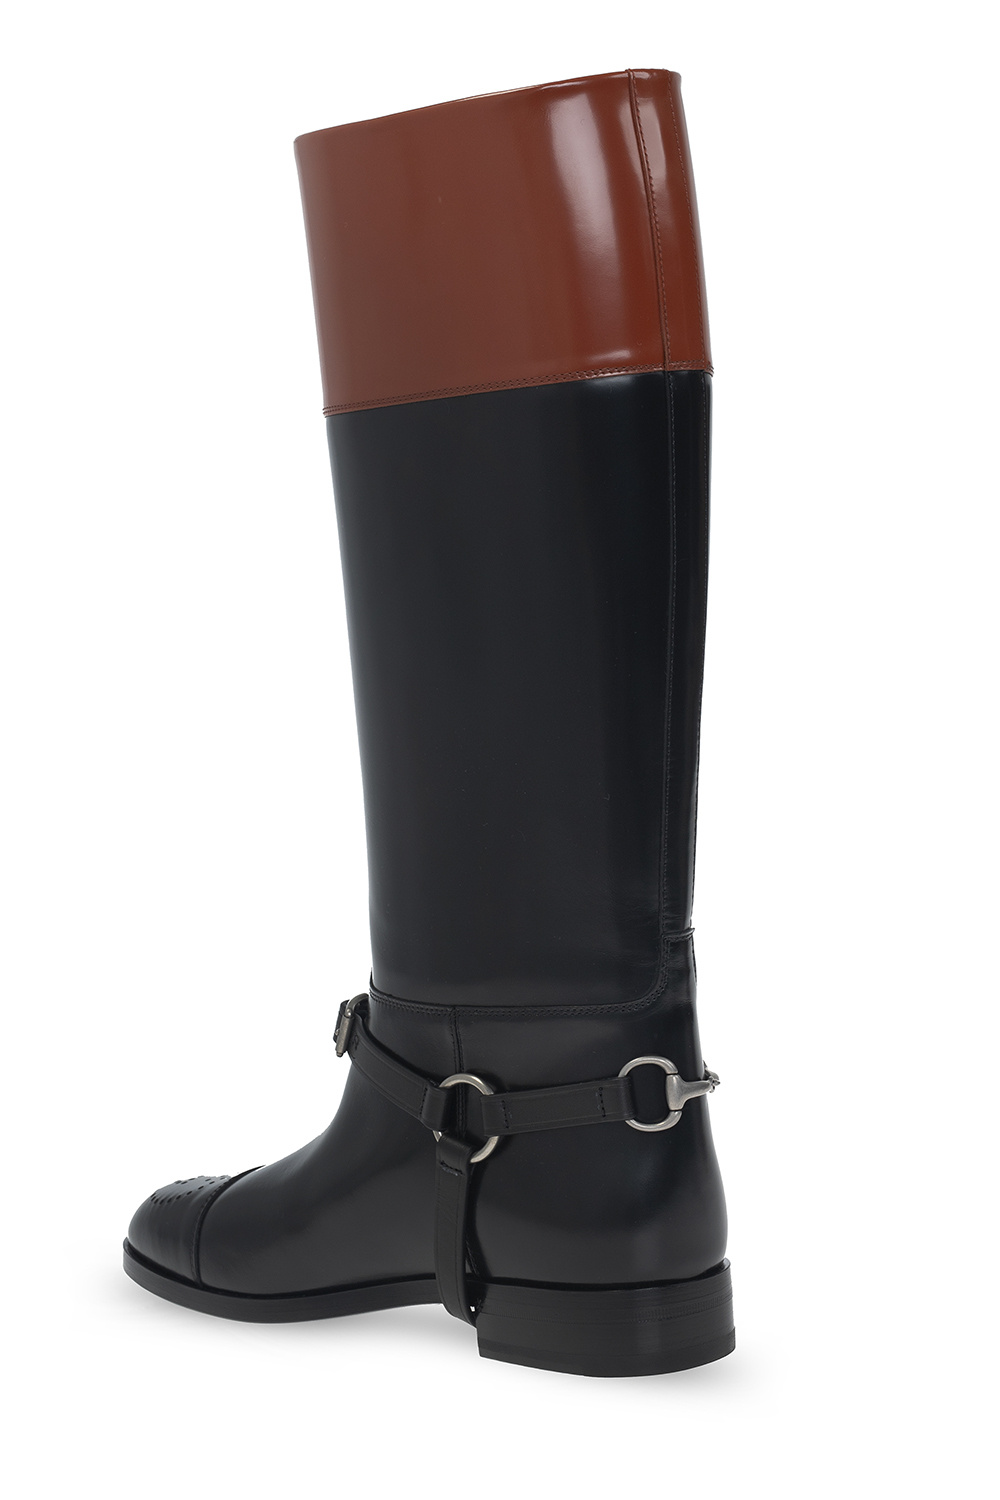 gucci collaborated Leather boots